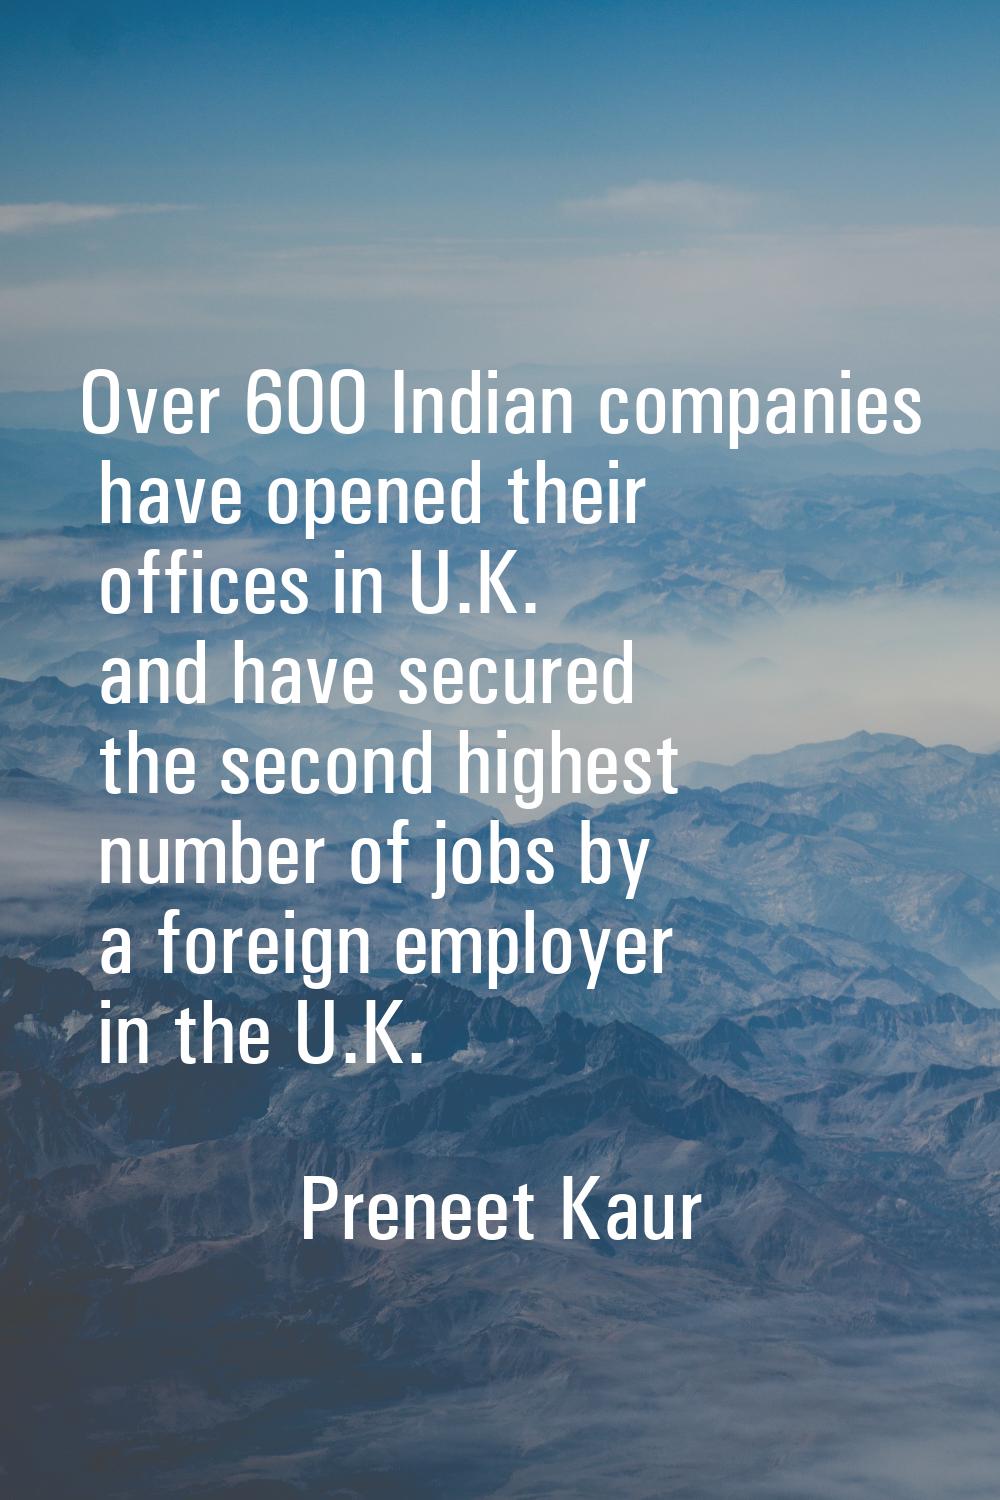 Over 600 Indian companies have opened their offices in U.K. and have secured the second highest num